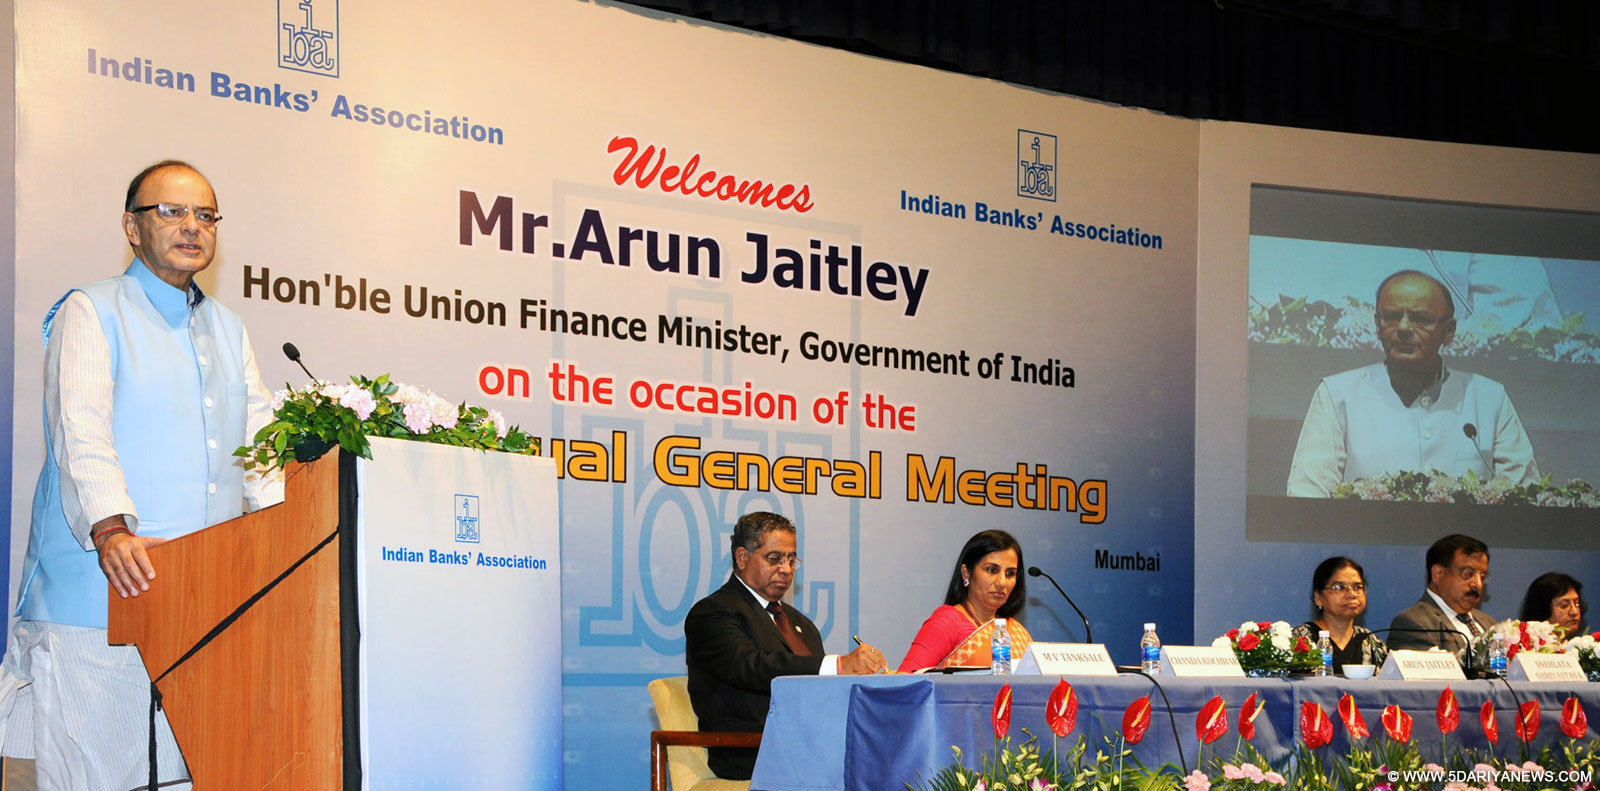 The Union Minister for Finance, Corporate Affairs and Information & Broadcasting, Shri Arun Jaitley addressing the valedictory function of the 68th Annual General Meeting of the Indian Banks Association, in Mumbai on 28, September 2015.